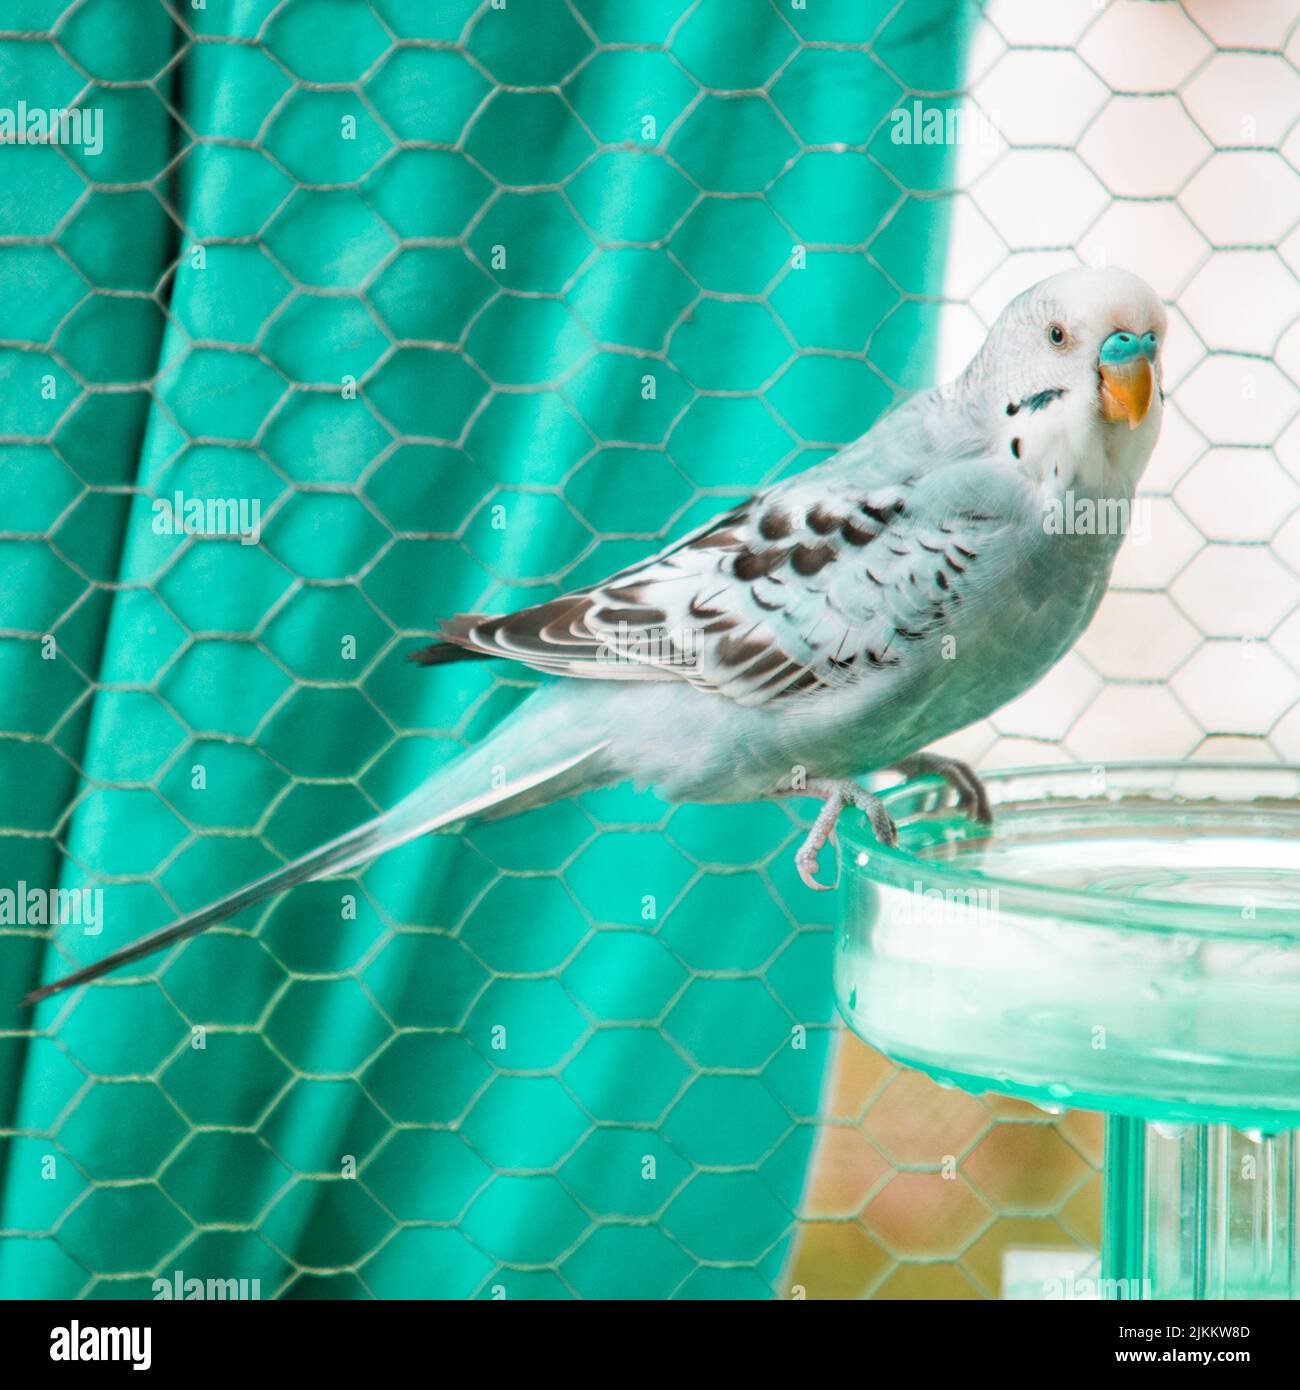 A colorful budgerigar standing on glass in background of wire fence Stock Photo